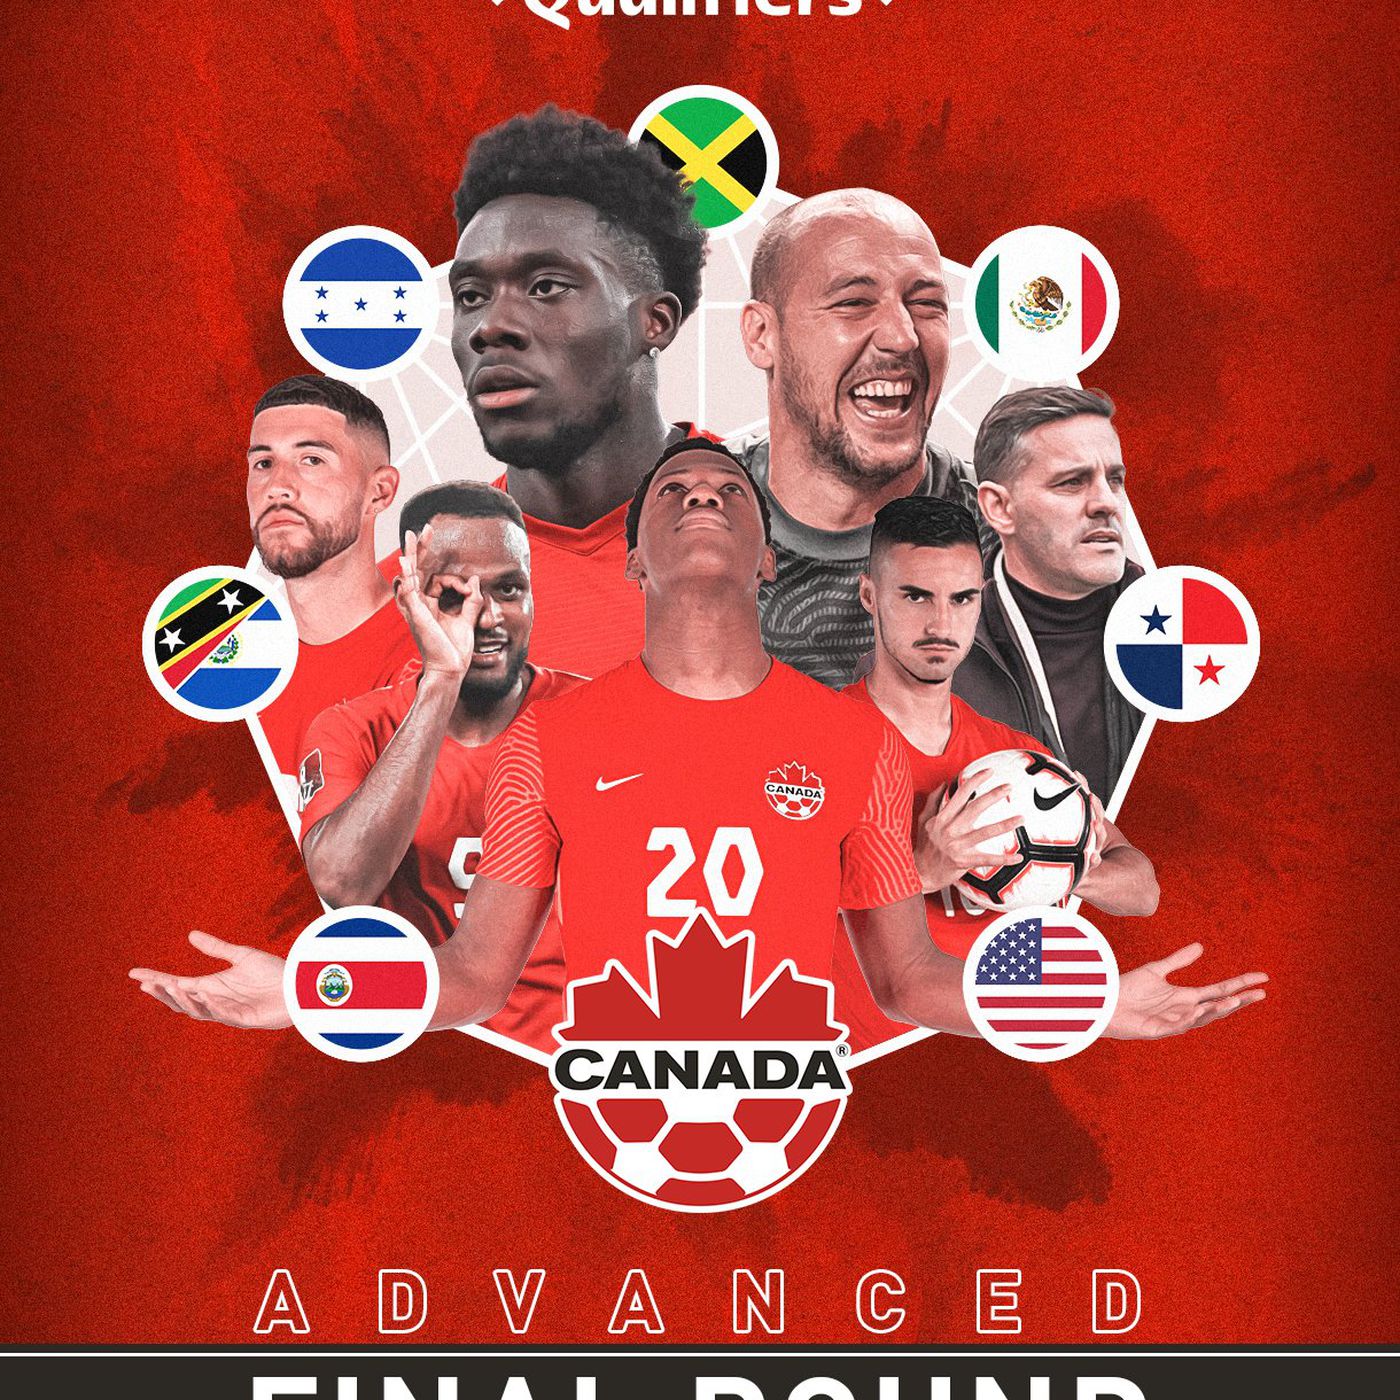 Mexico World Cup Schedule 2022 What's Next For Canada In 2022 World Cup Qualifying? - Waking The Red